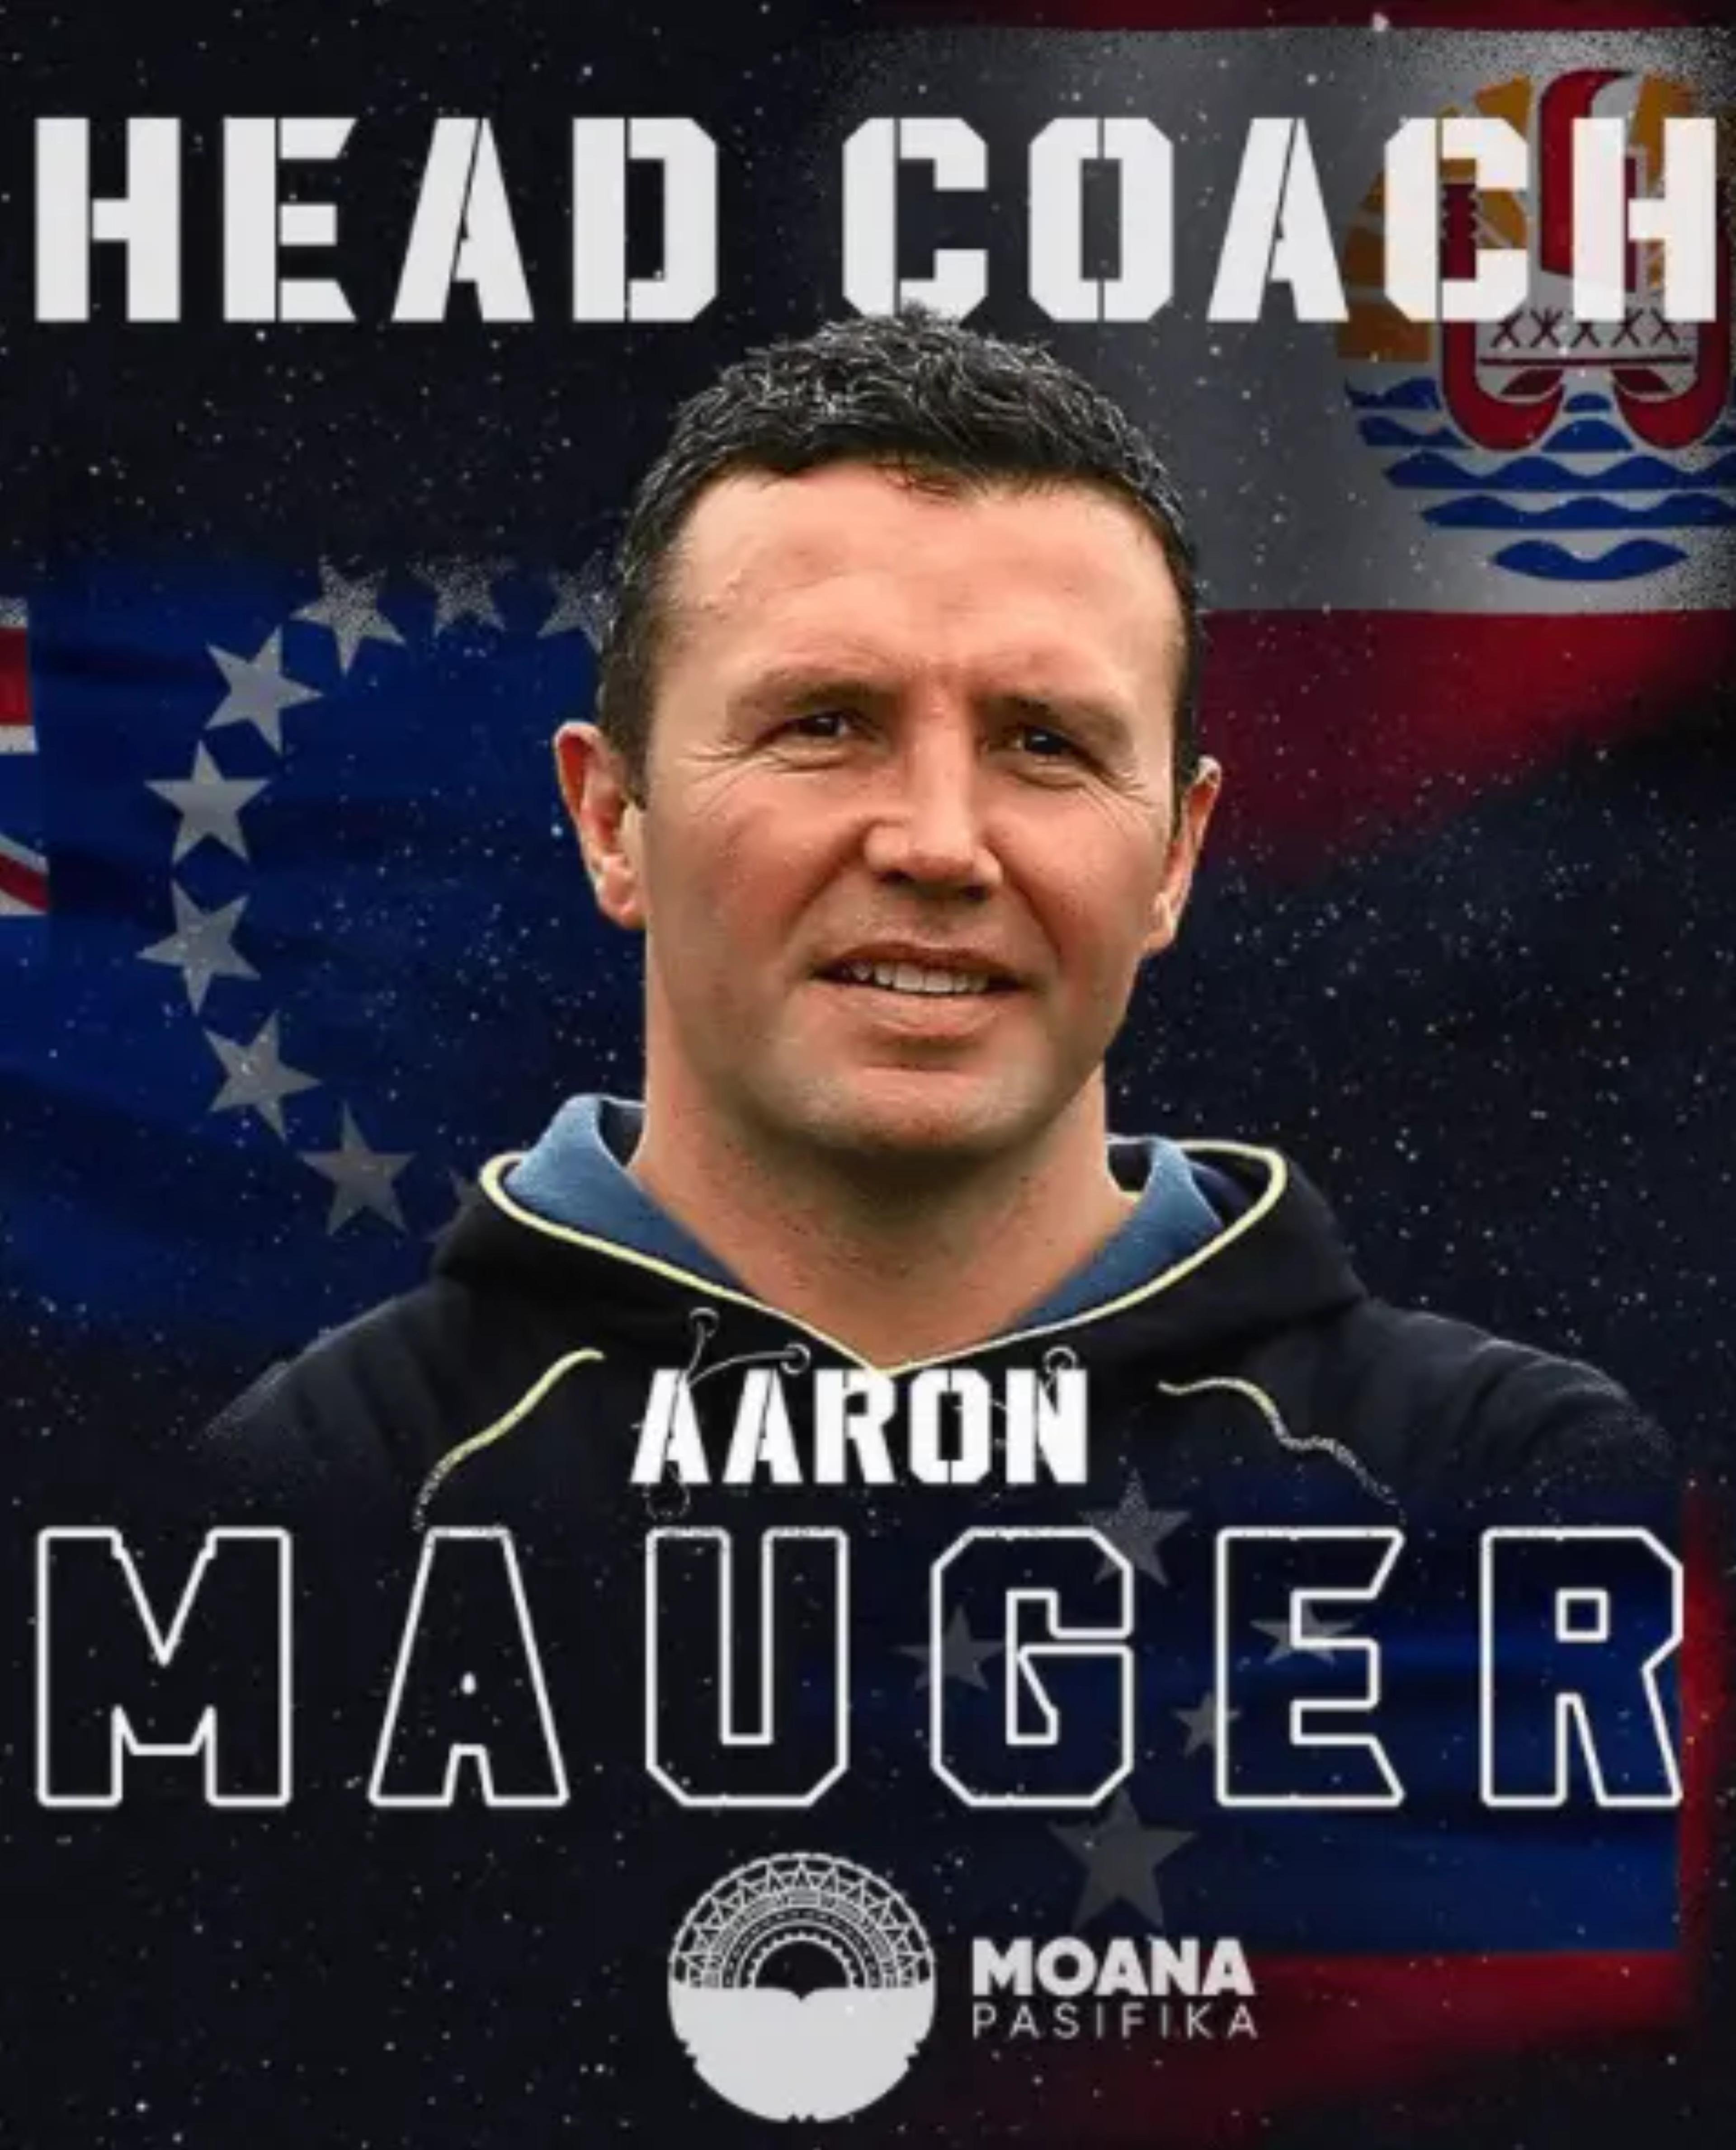 Head Coach for the Moana Pasifika Super Rugby team, Aaron Mauger